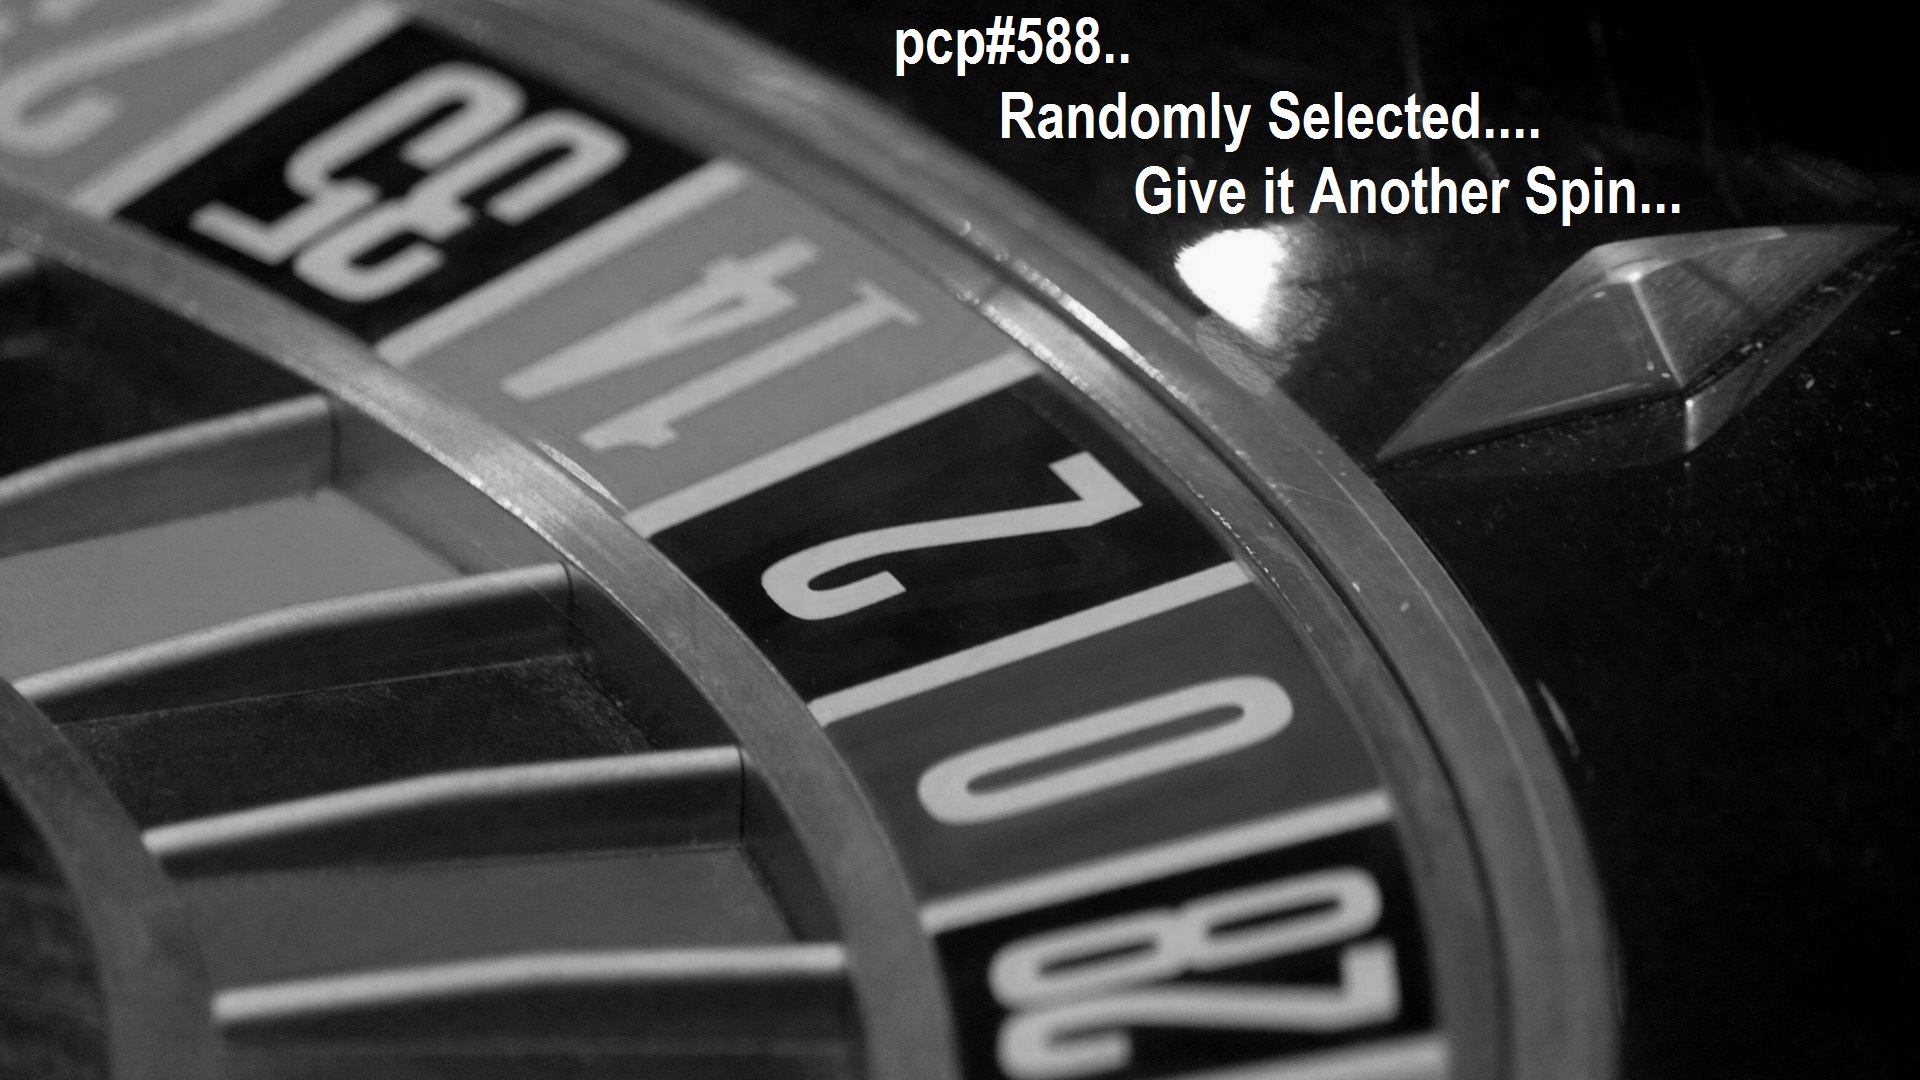 PCP#588... Randomly Selected....Give It Another Spin...